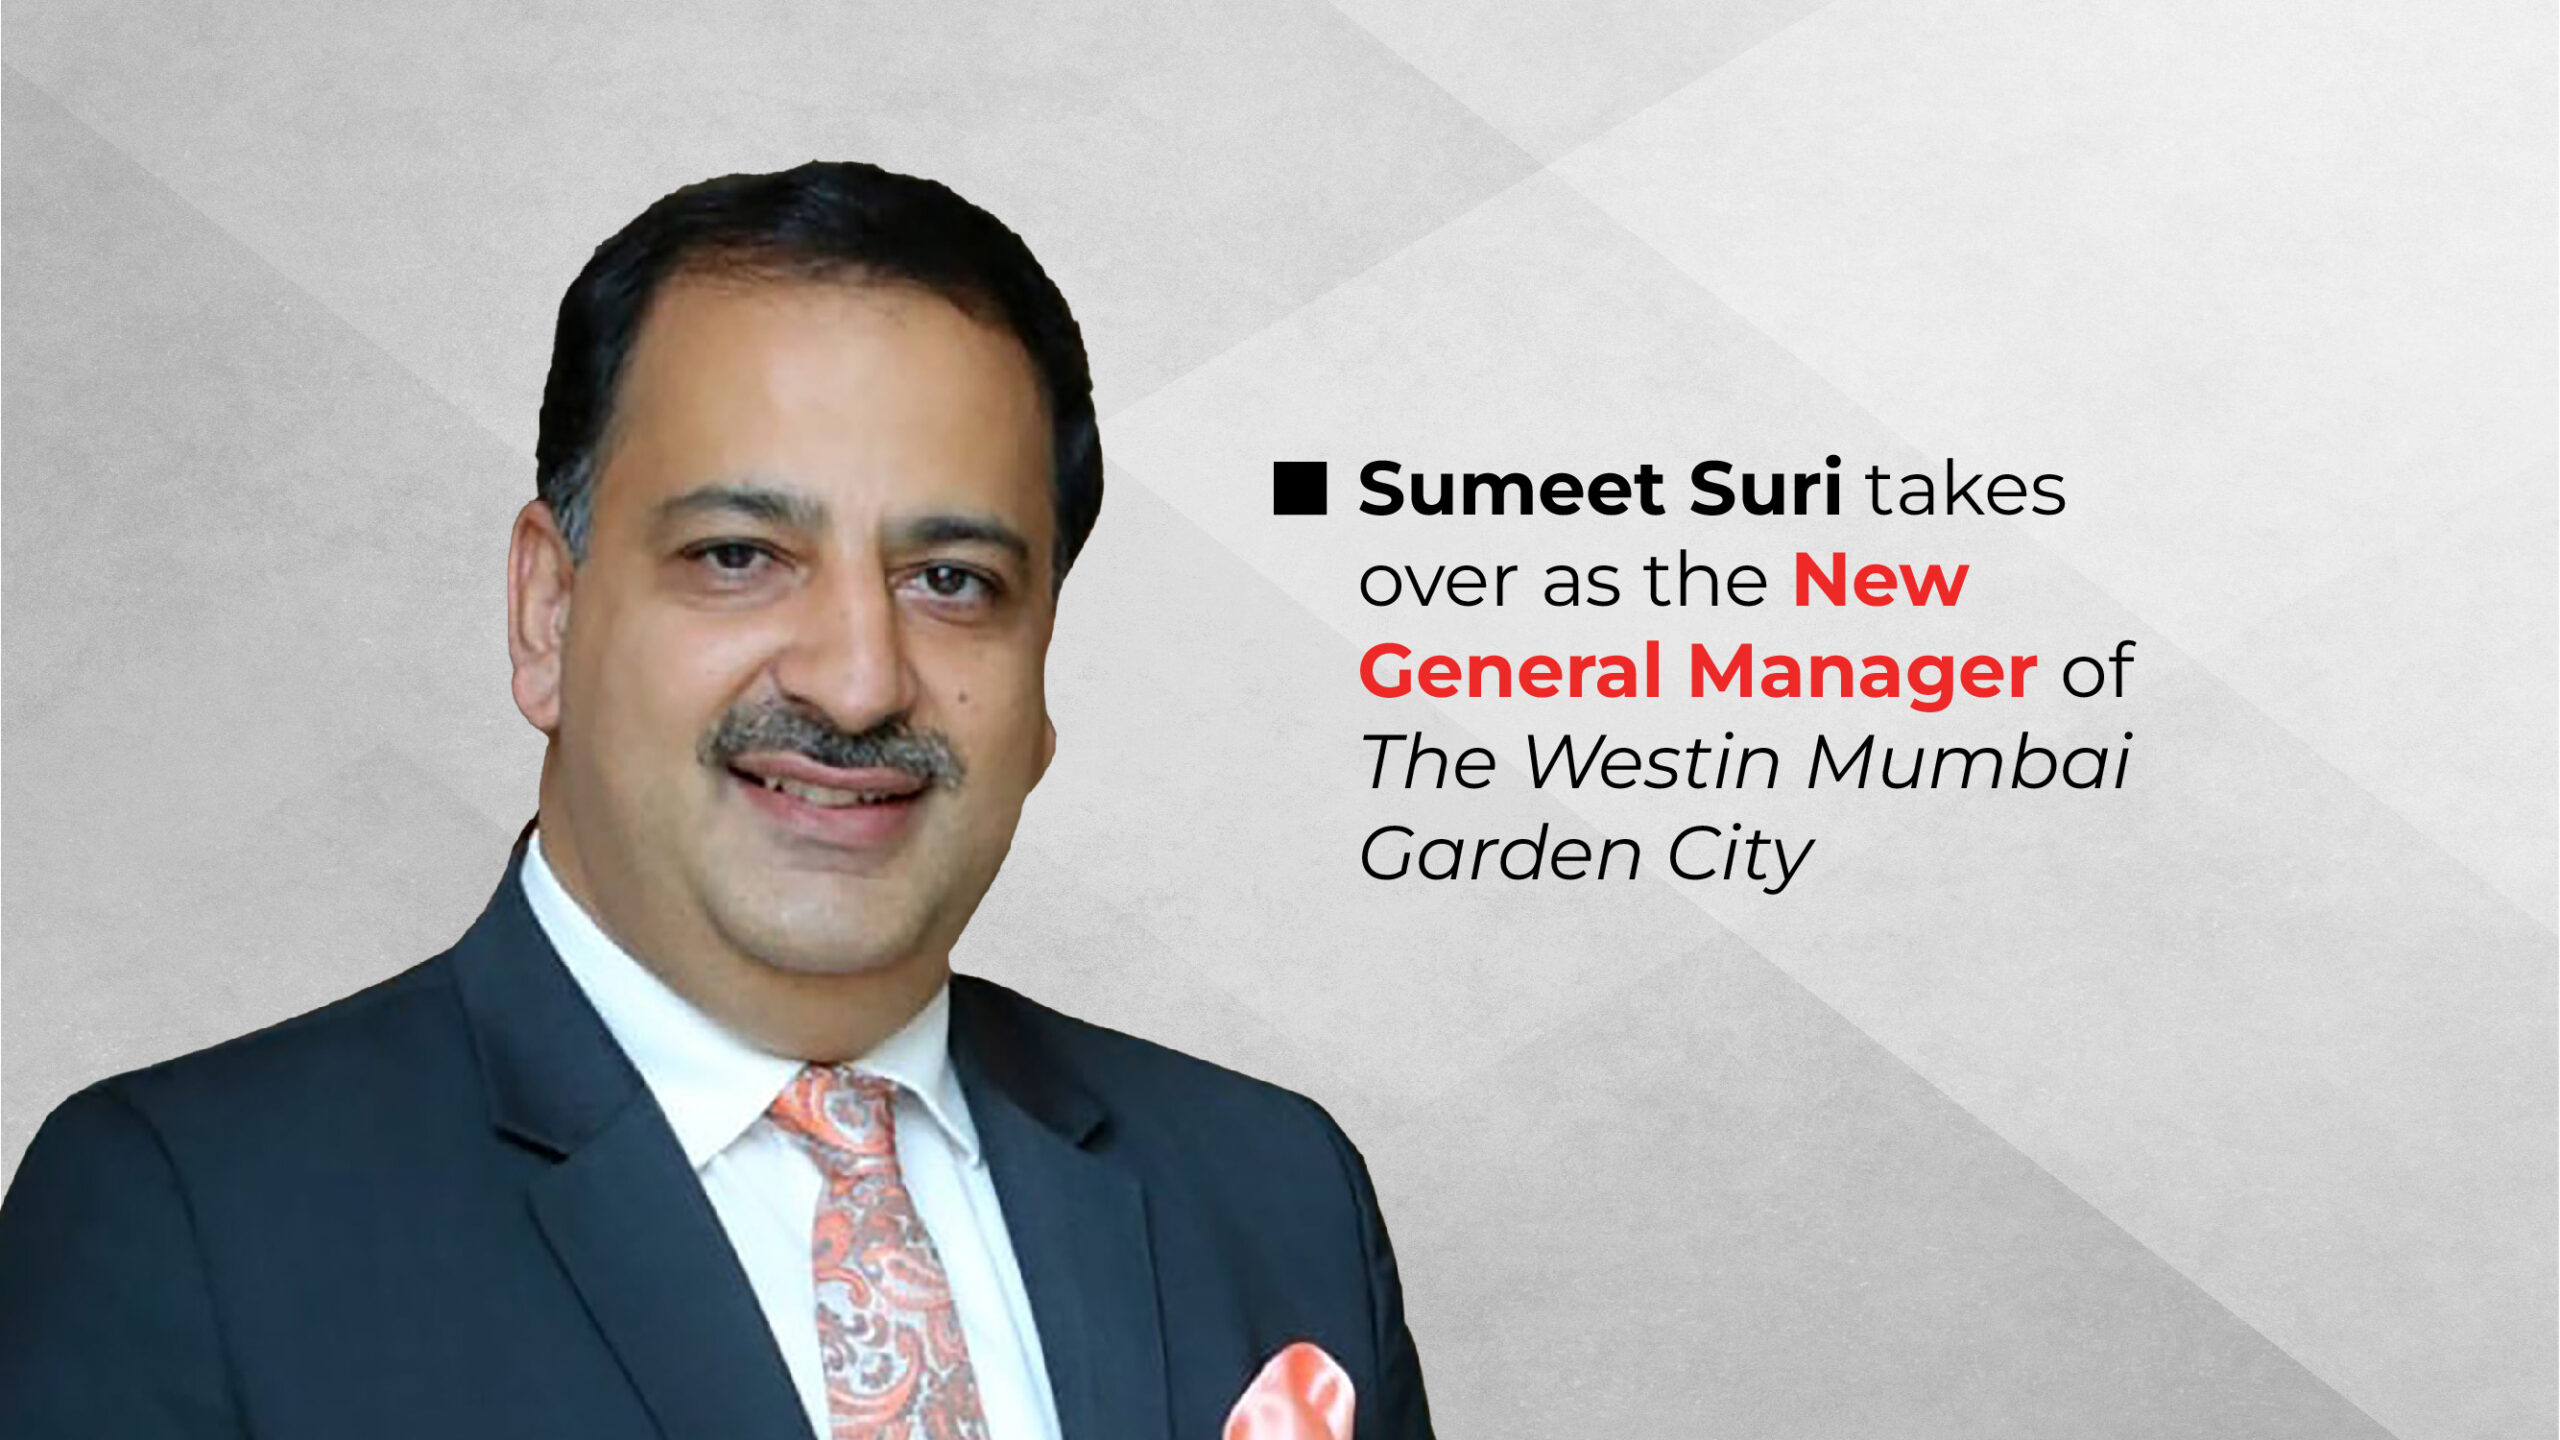 Sumeet Suri takes over as the New General Manager of The Westin Mumbai Garden City